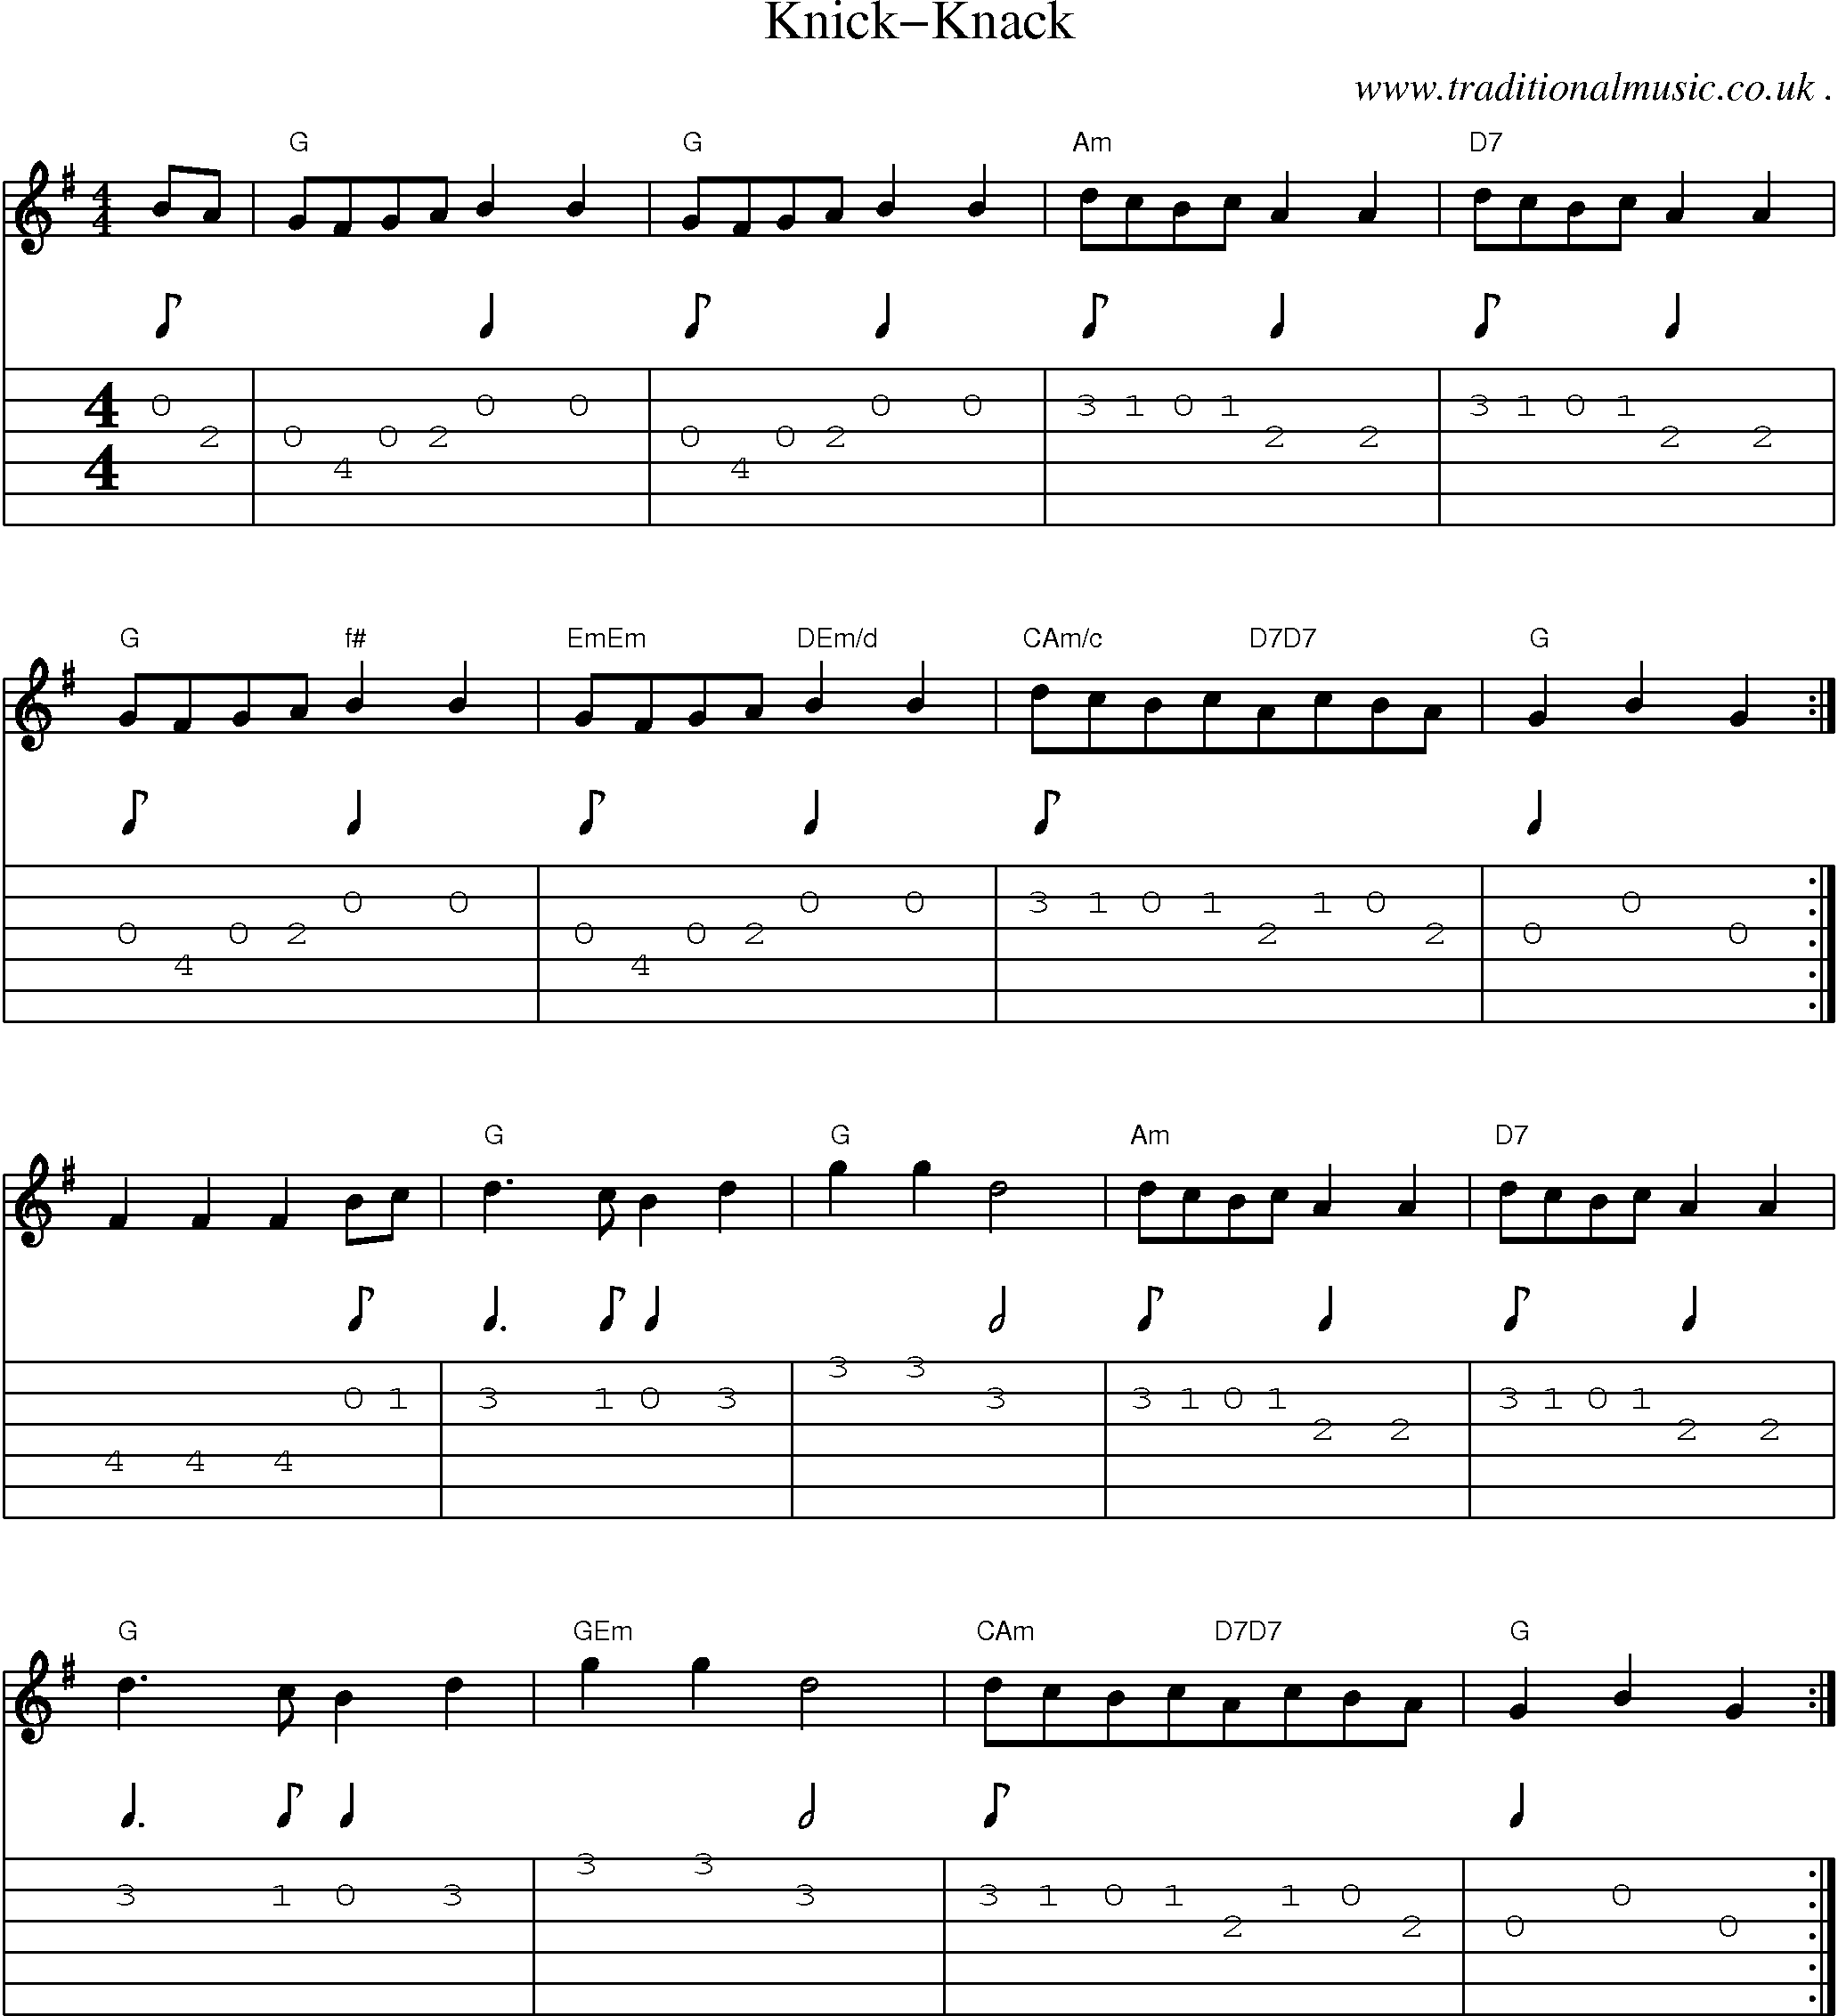 Sheet-Music and Guitar Tabs for Knick-knack